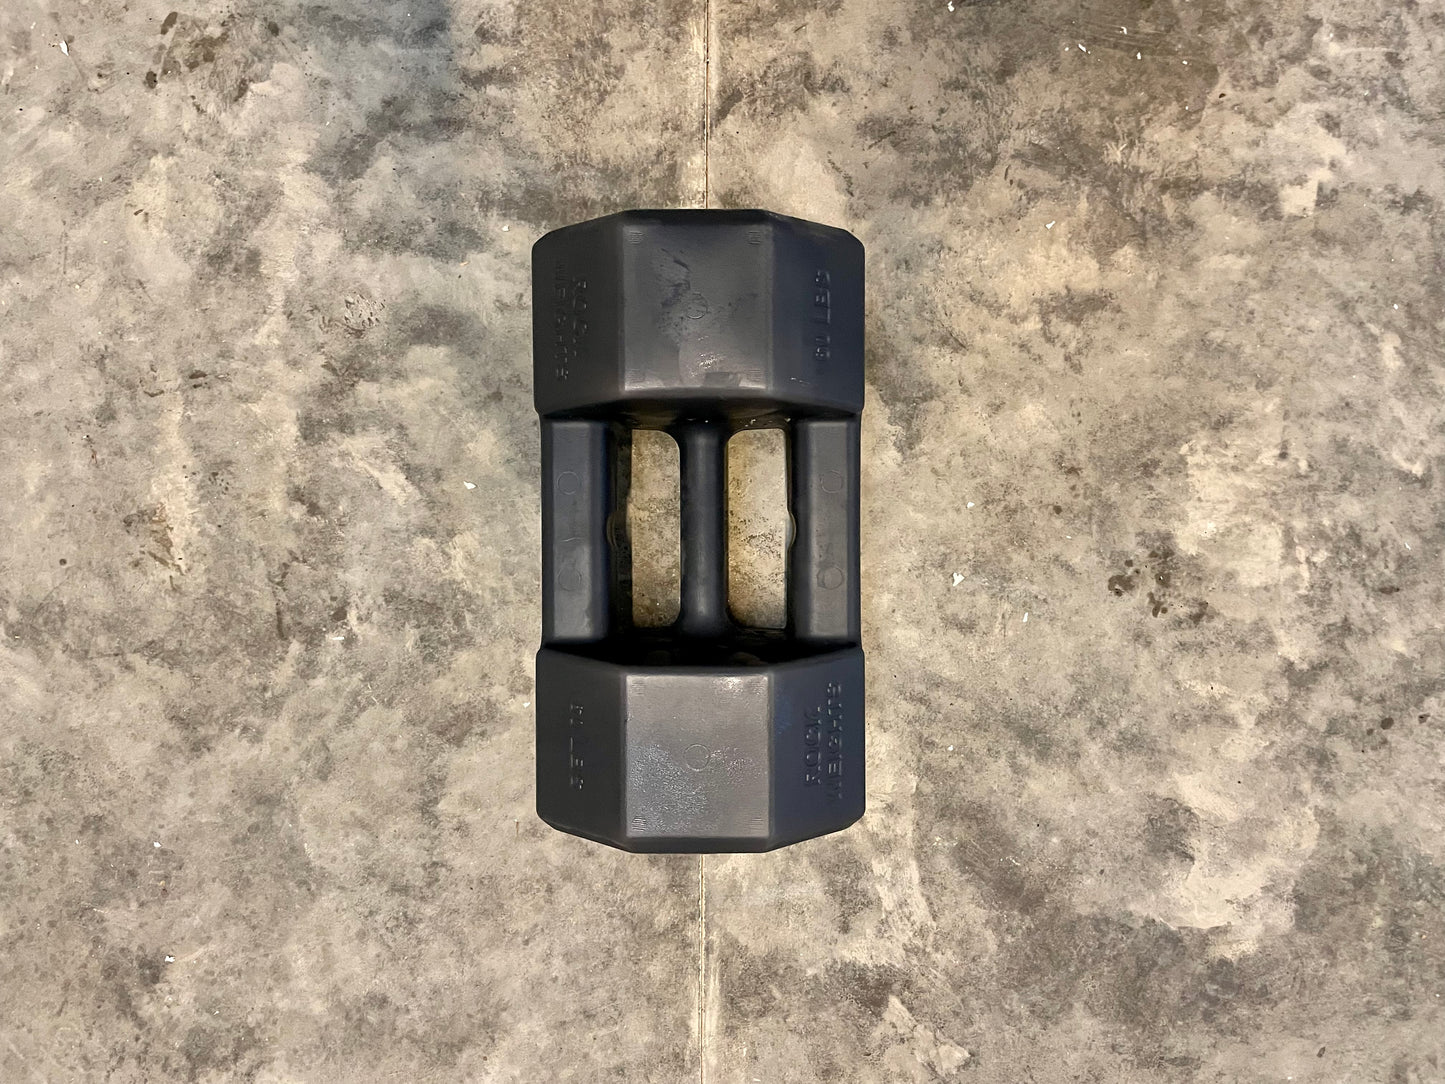 Dumbbell Mold (25, 40, 60, and 80 lbs)